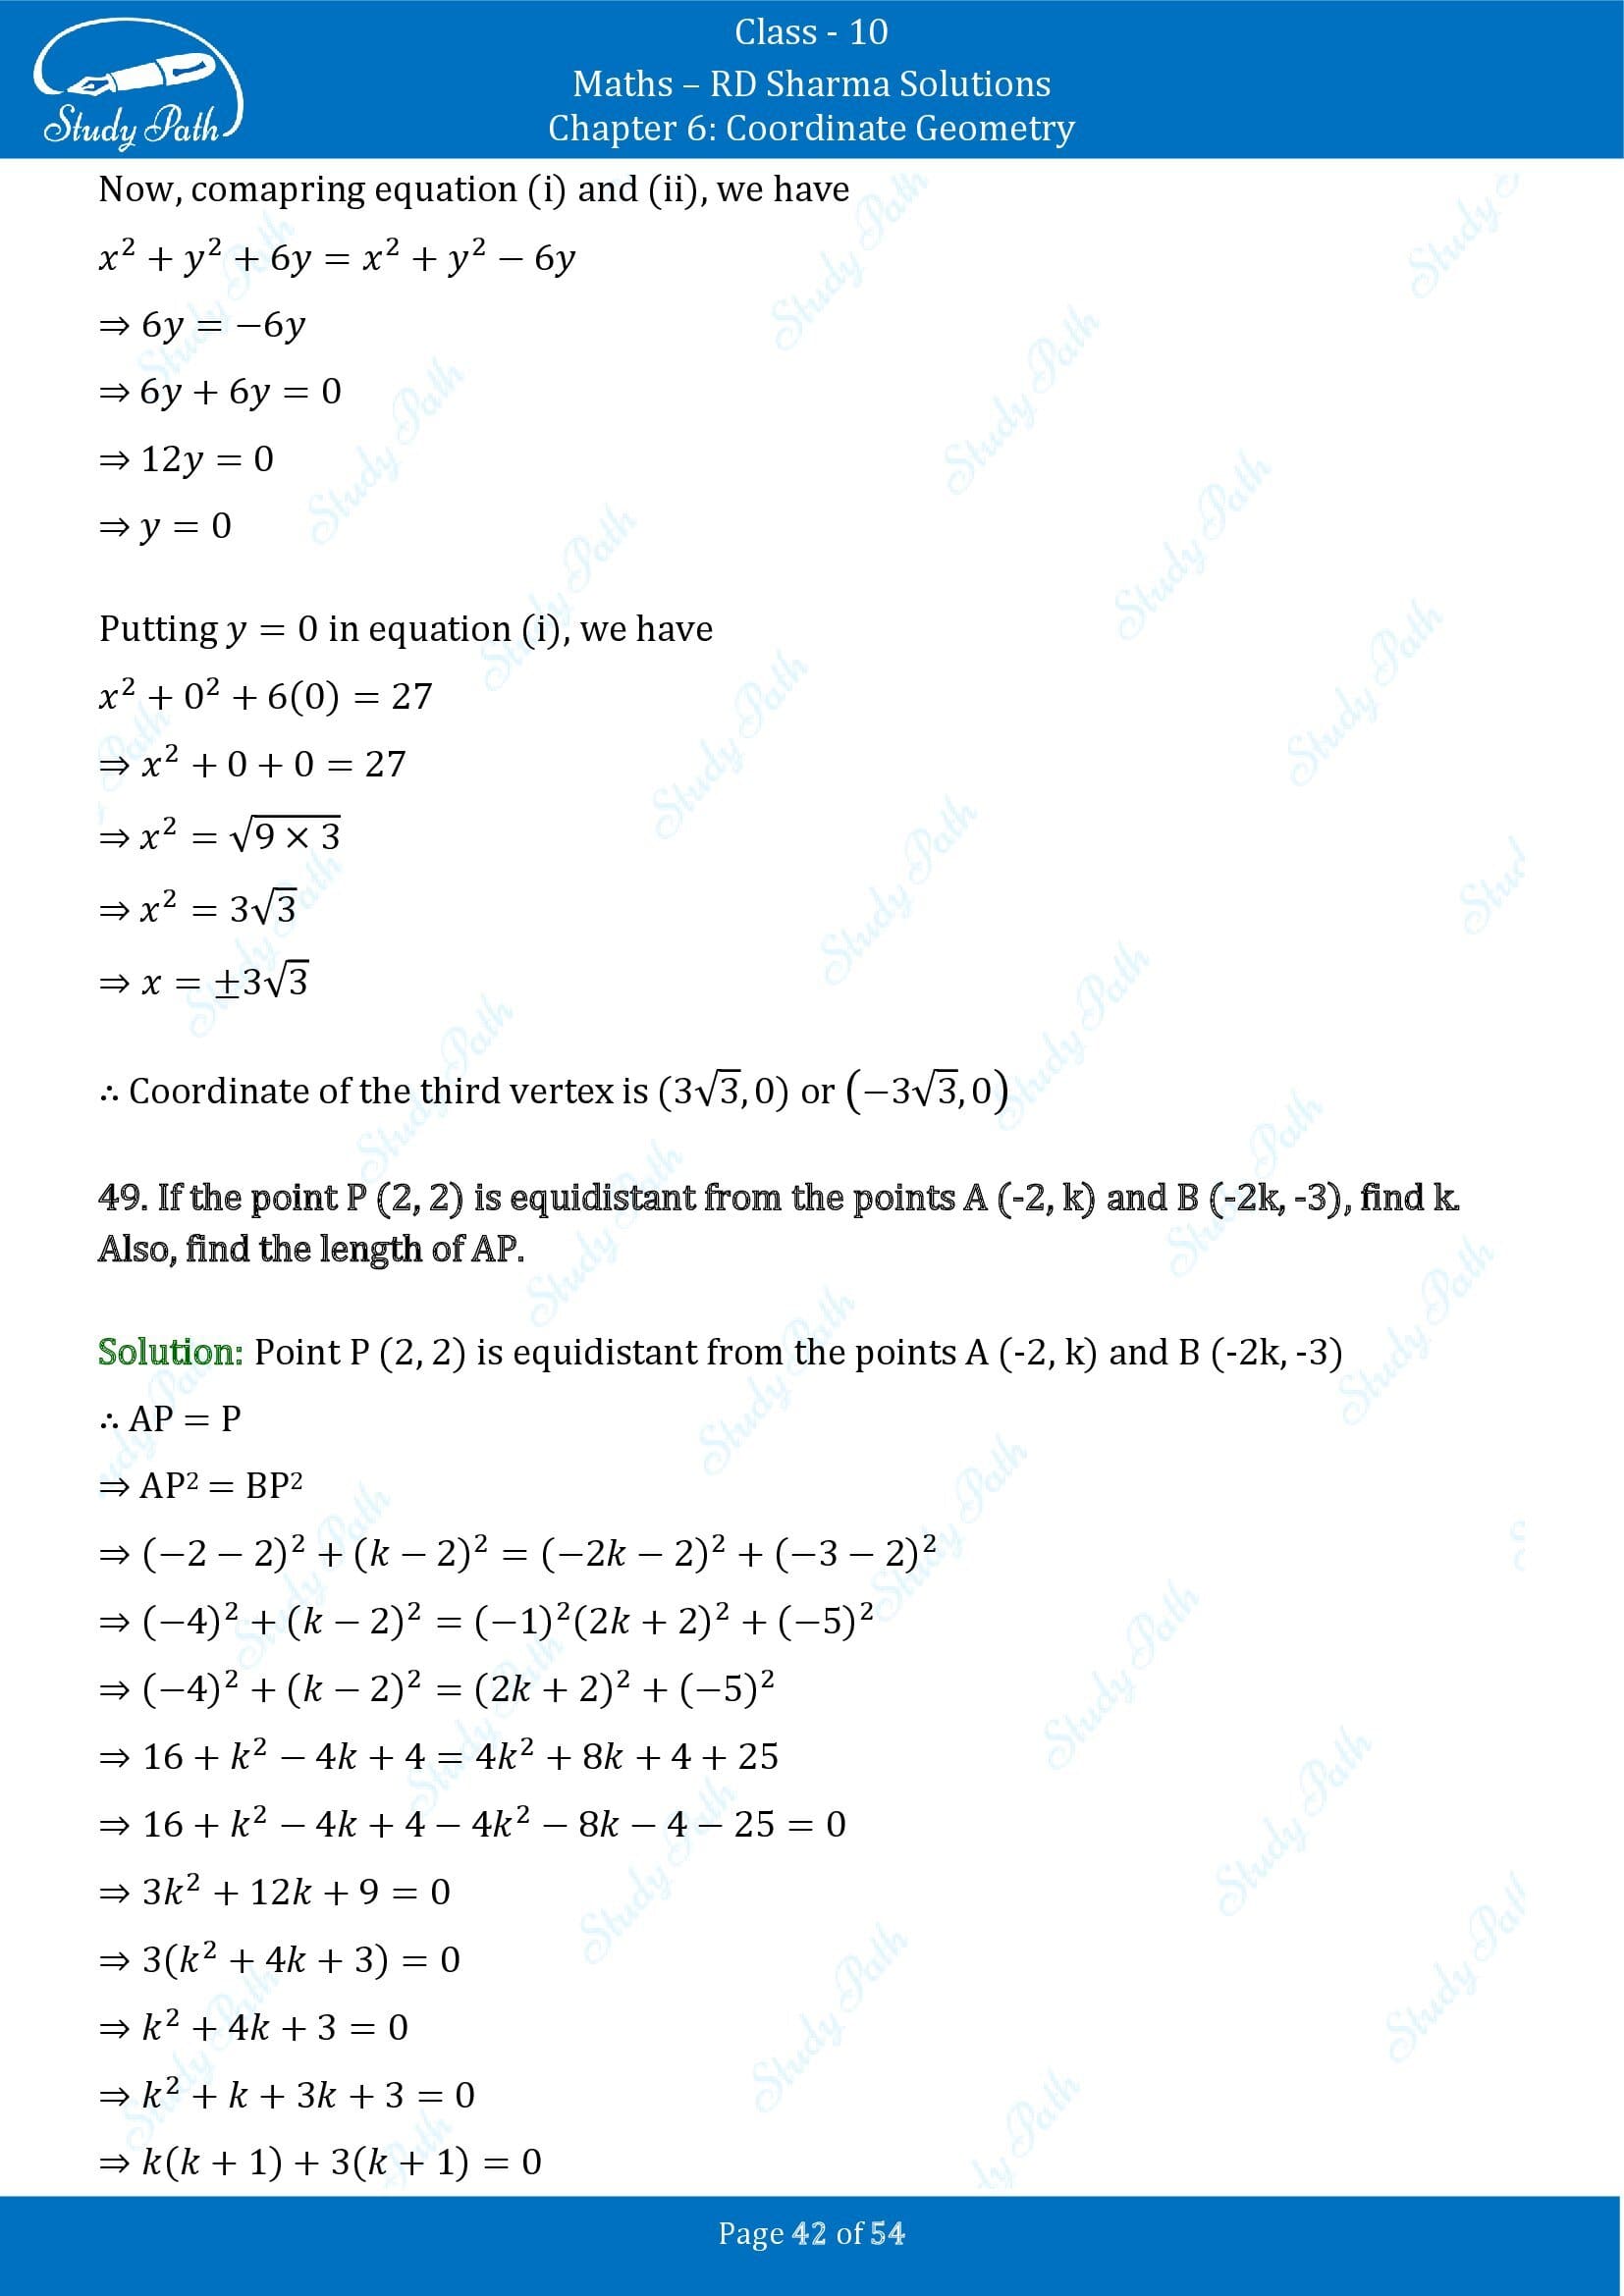 RD Sharma Solutions Class 10 Chapter 6 Coordinate Geometry Exercise 6.2 0042